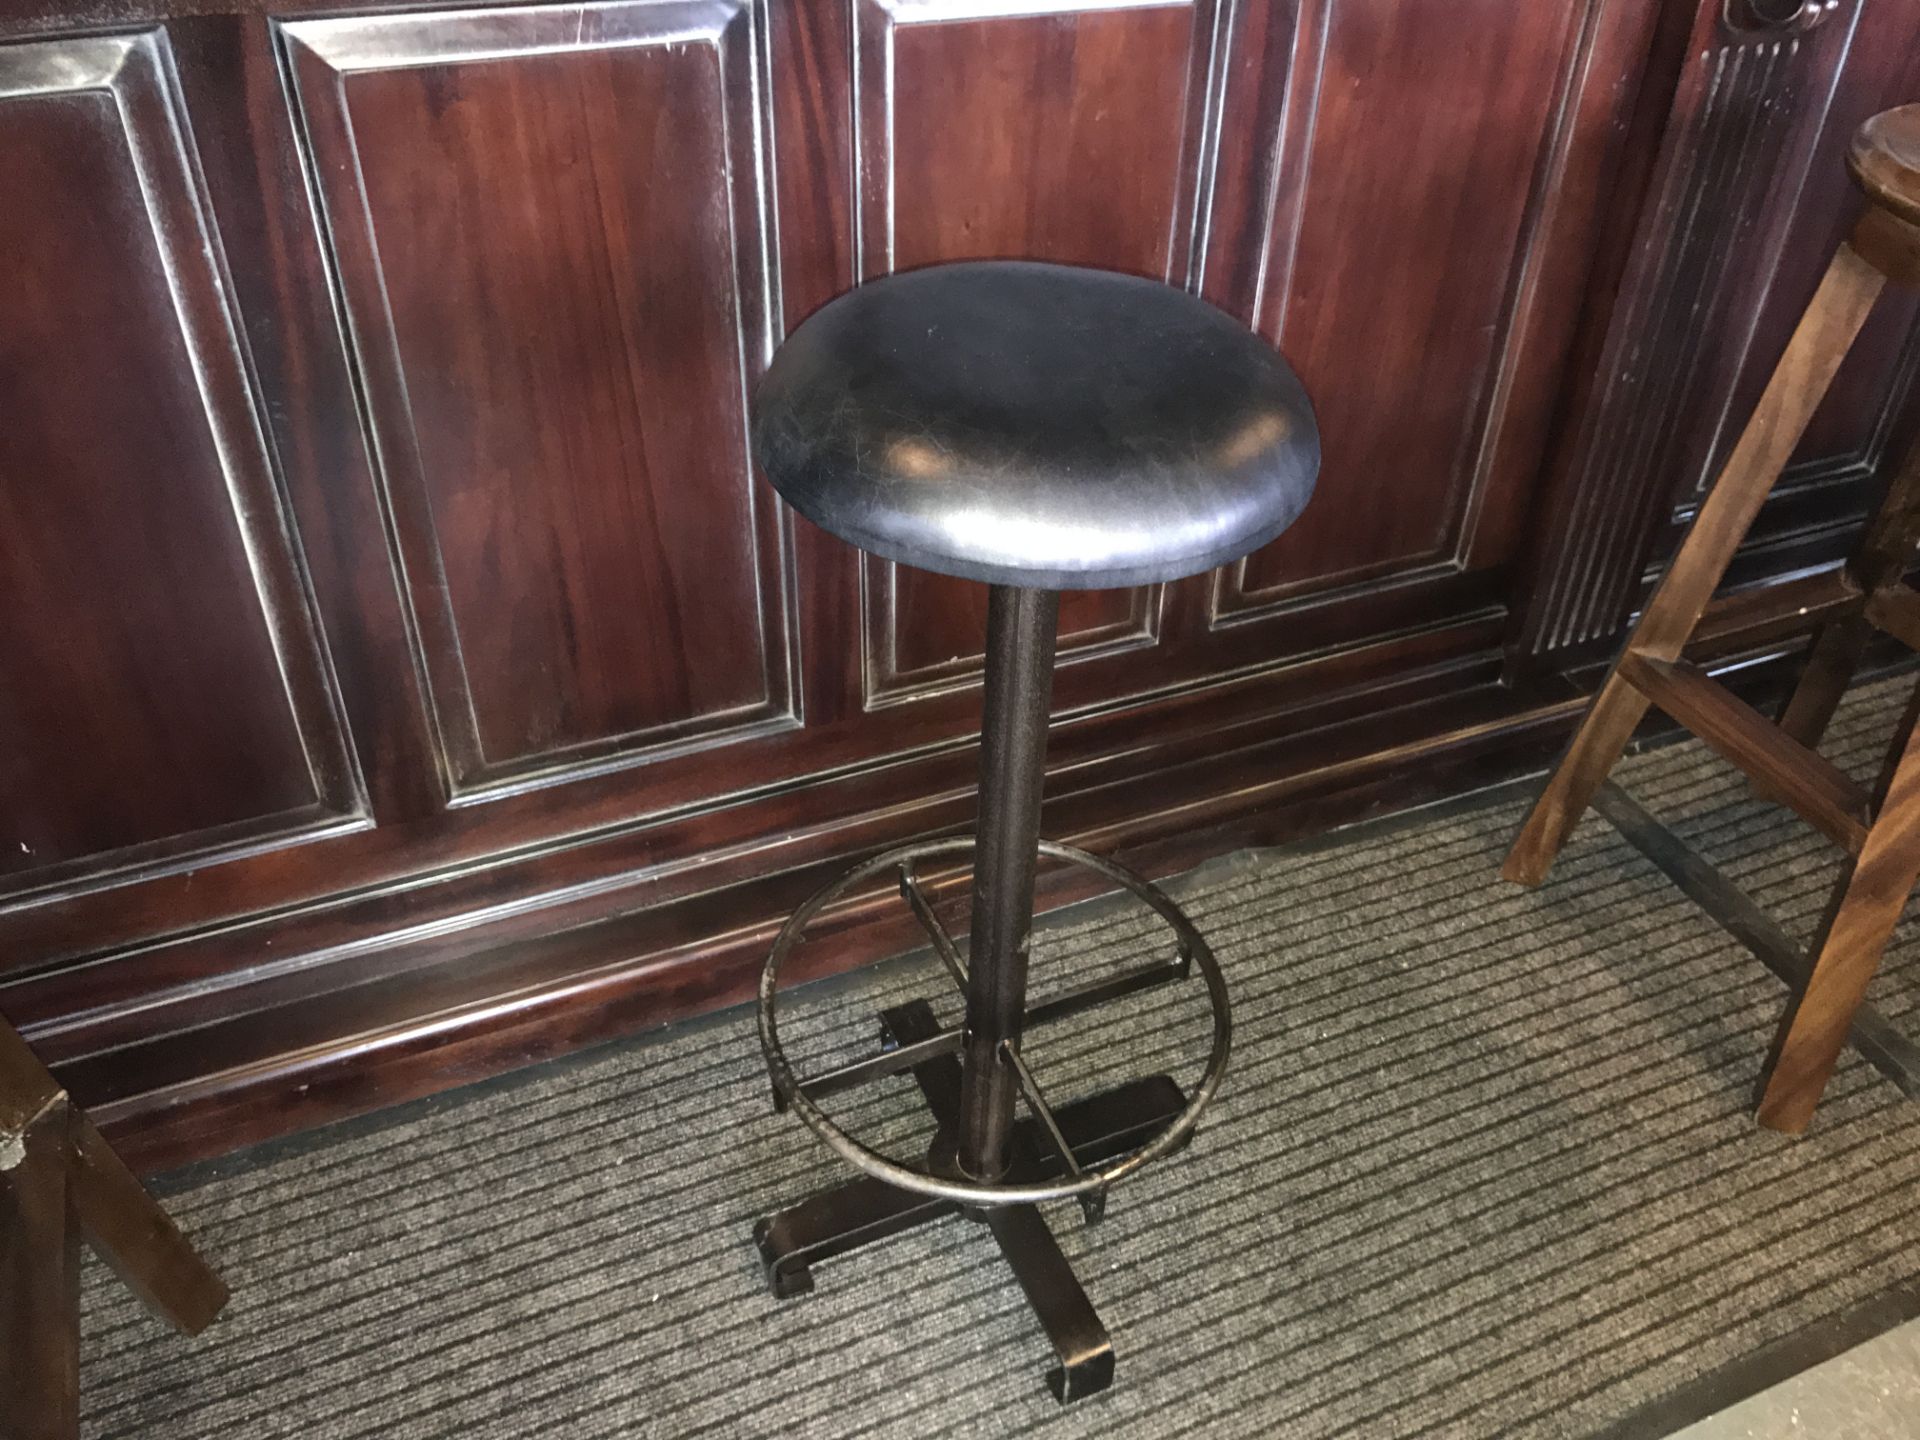 BOXED NEW BLACK INDUSTRIAL BAR STOOL WITH BLACK LEATHER SEAT